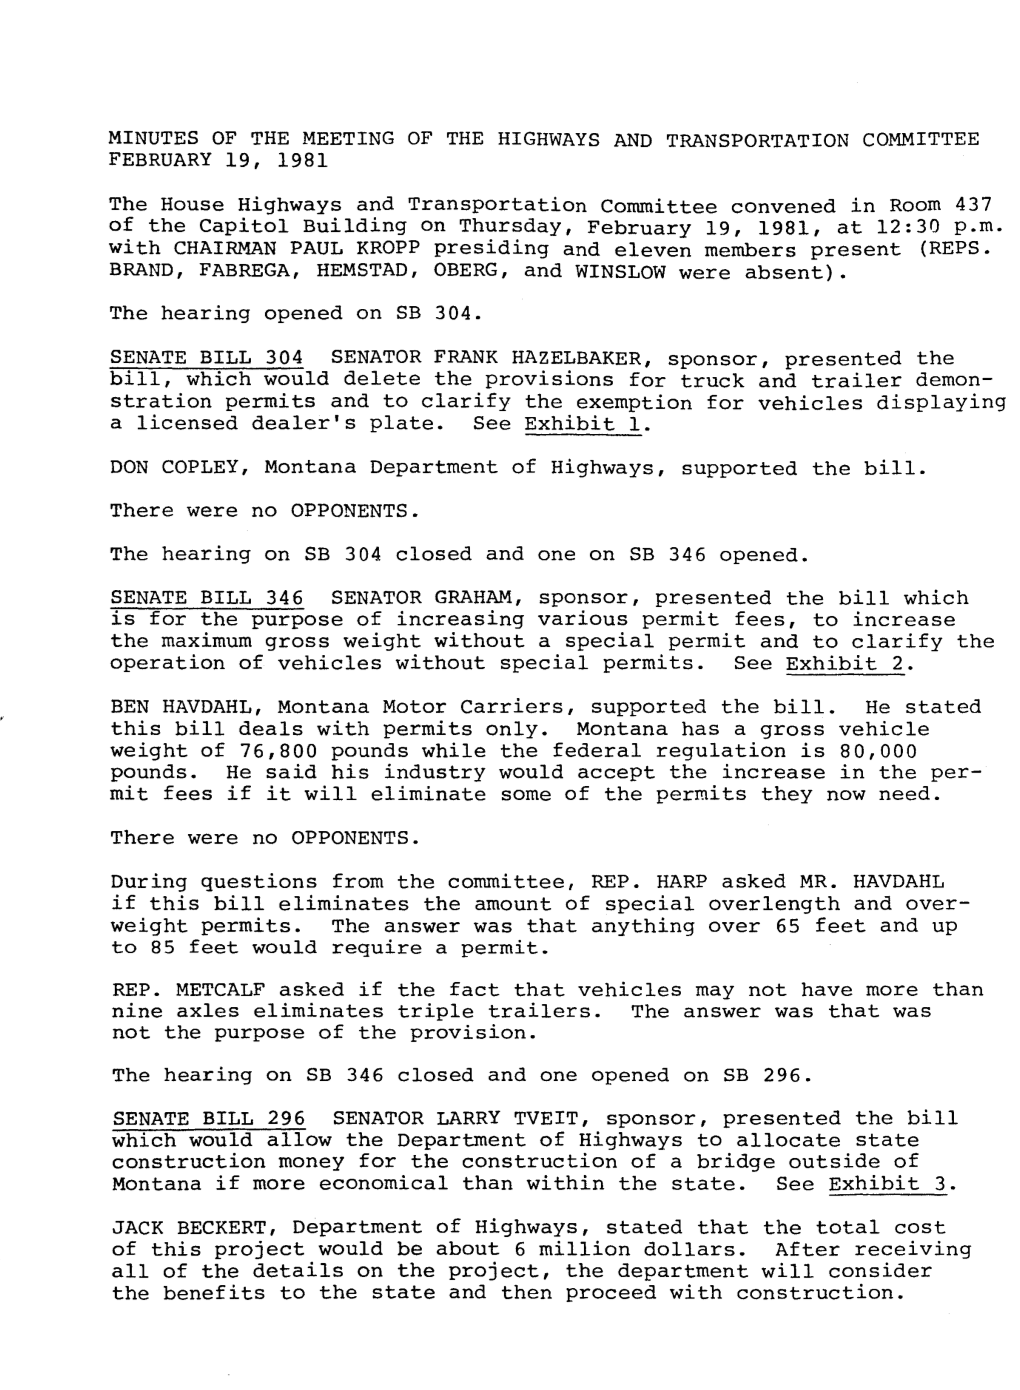 Minutes of the Meeting of the Highways and Transportation Committee February 19, 1981